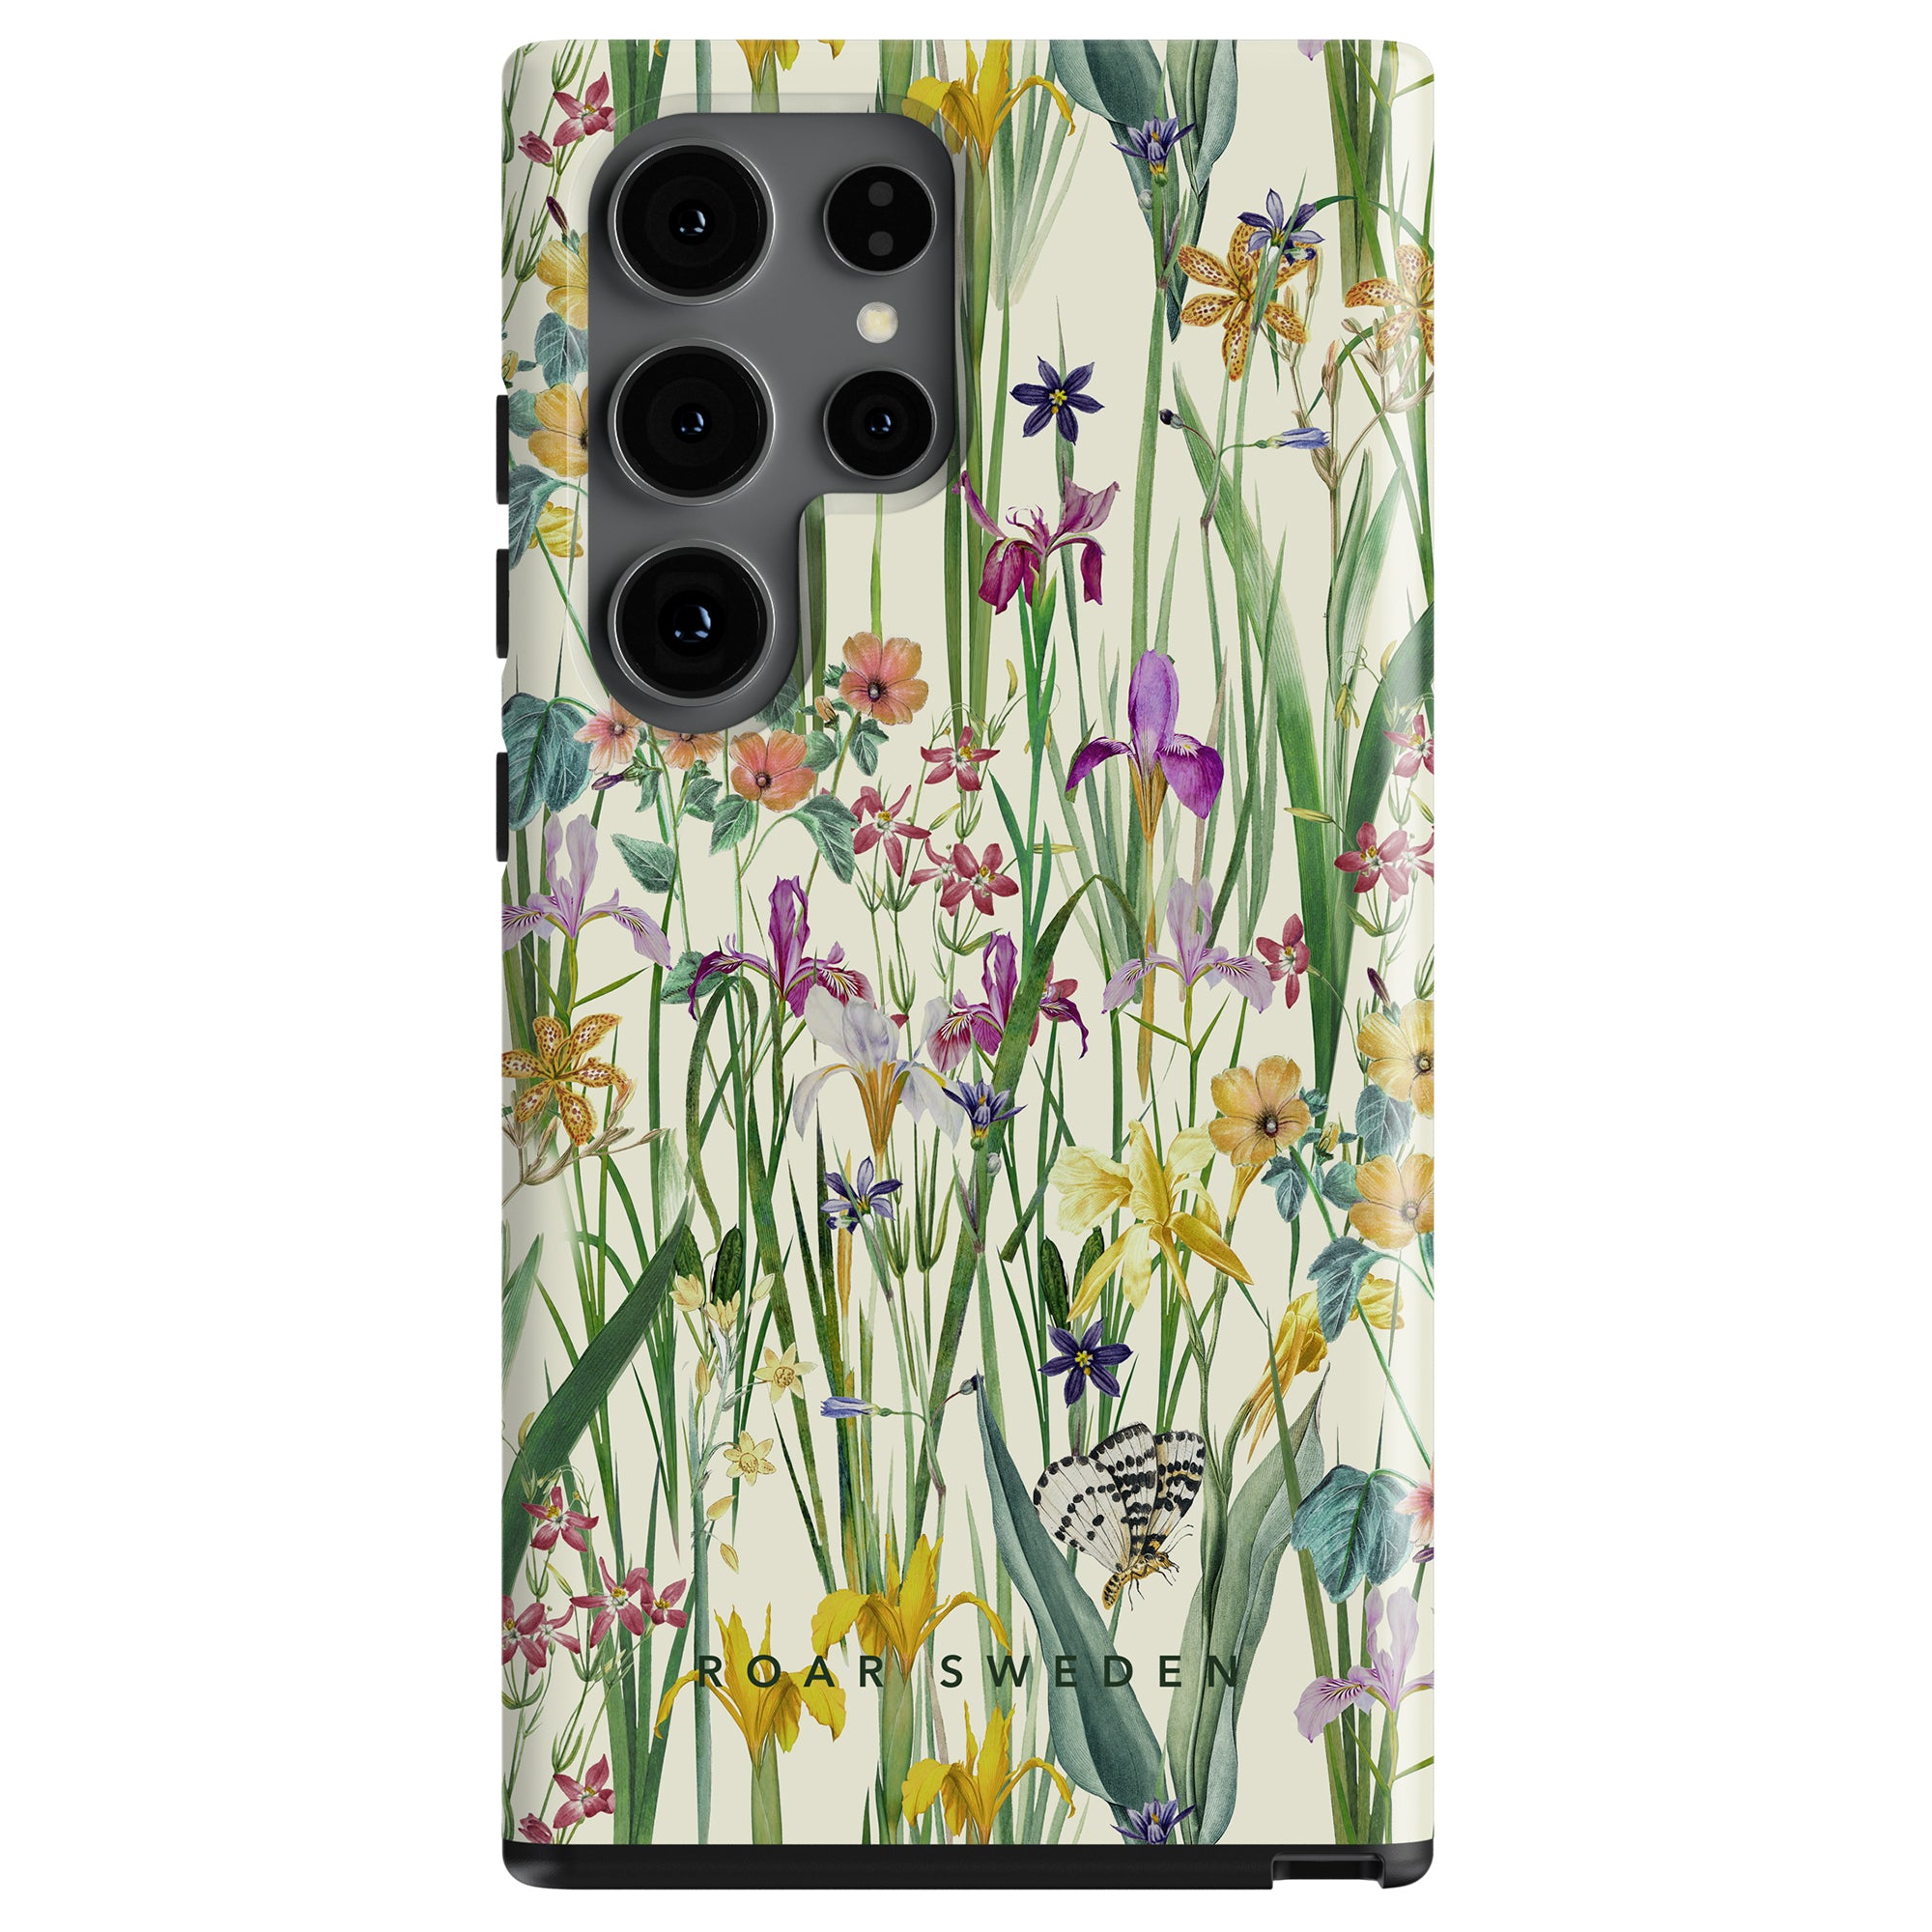 A smartphone with a Blooming Meadow - Tough Case, showcasing various flowers and a butterfly, and highlighting the camera lenses and brand logo.